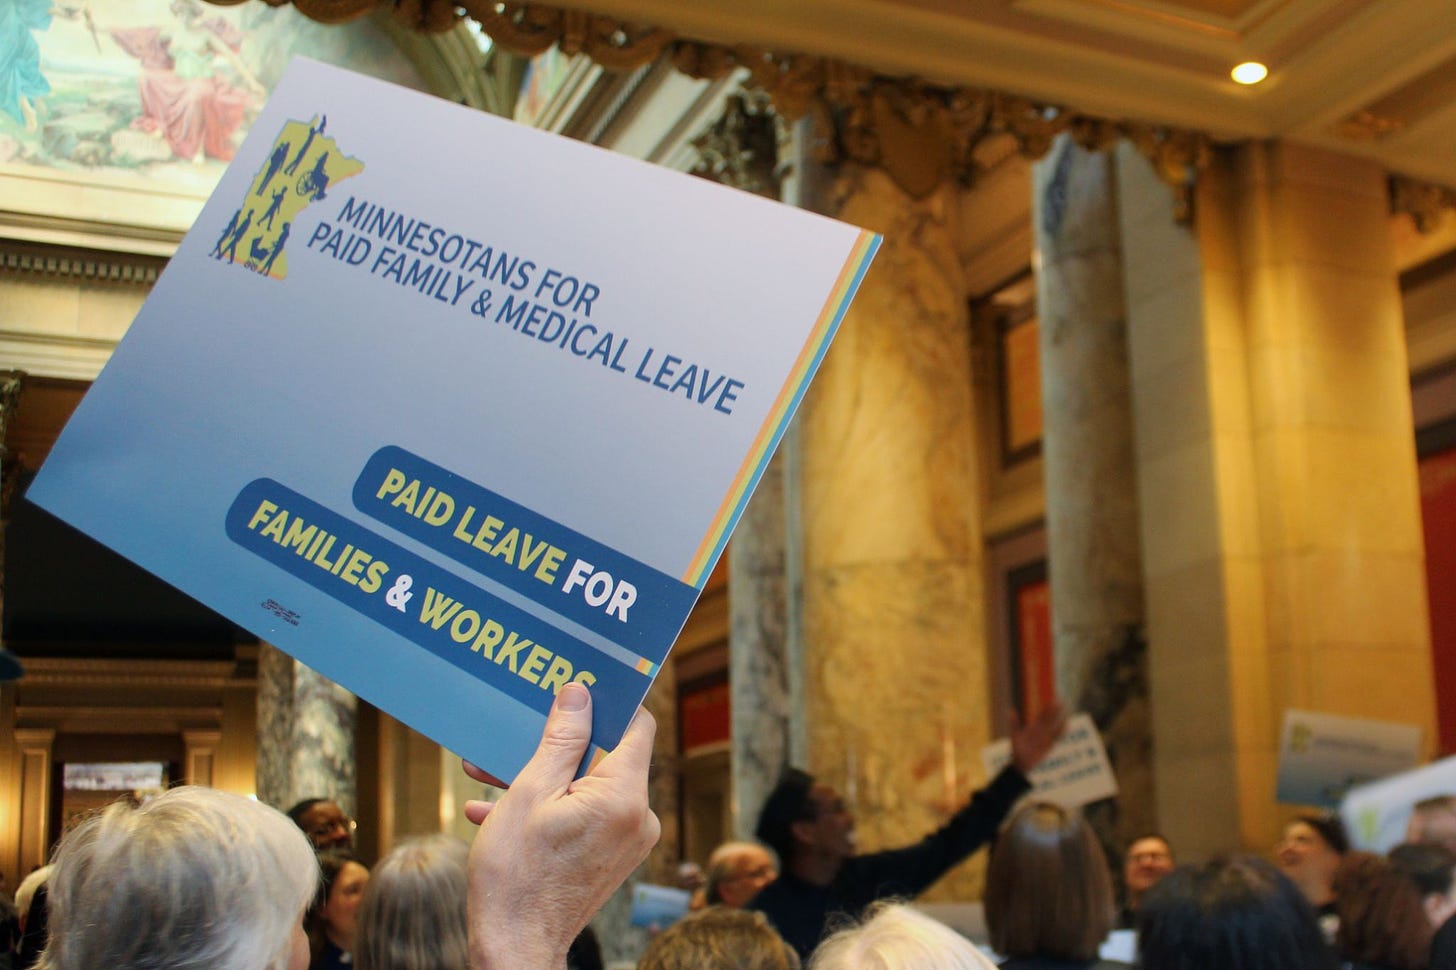 A hand holds up a blue sign with the Minnesota state outline reading "Minnesotans for paid family & medical leave" and "paid leave for families & workers" behind the sign is a crowd of people, one person is raising their hand toward the right side of the image